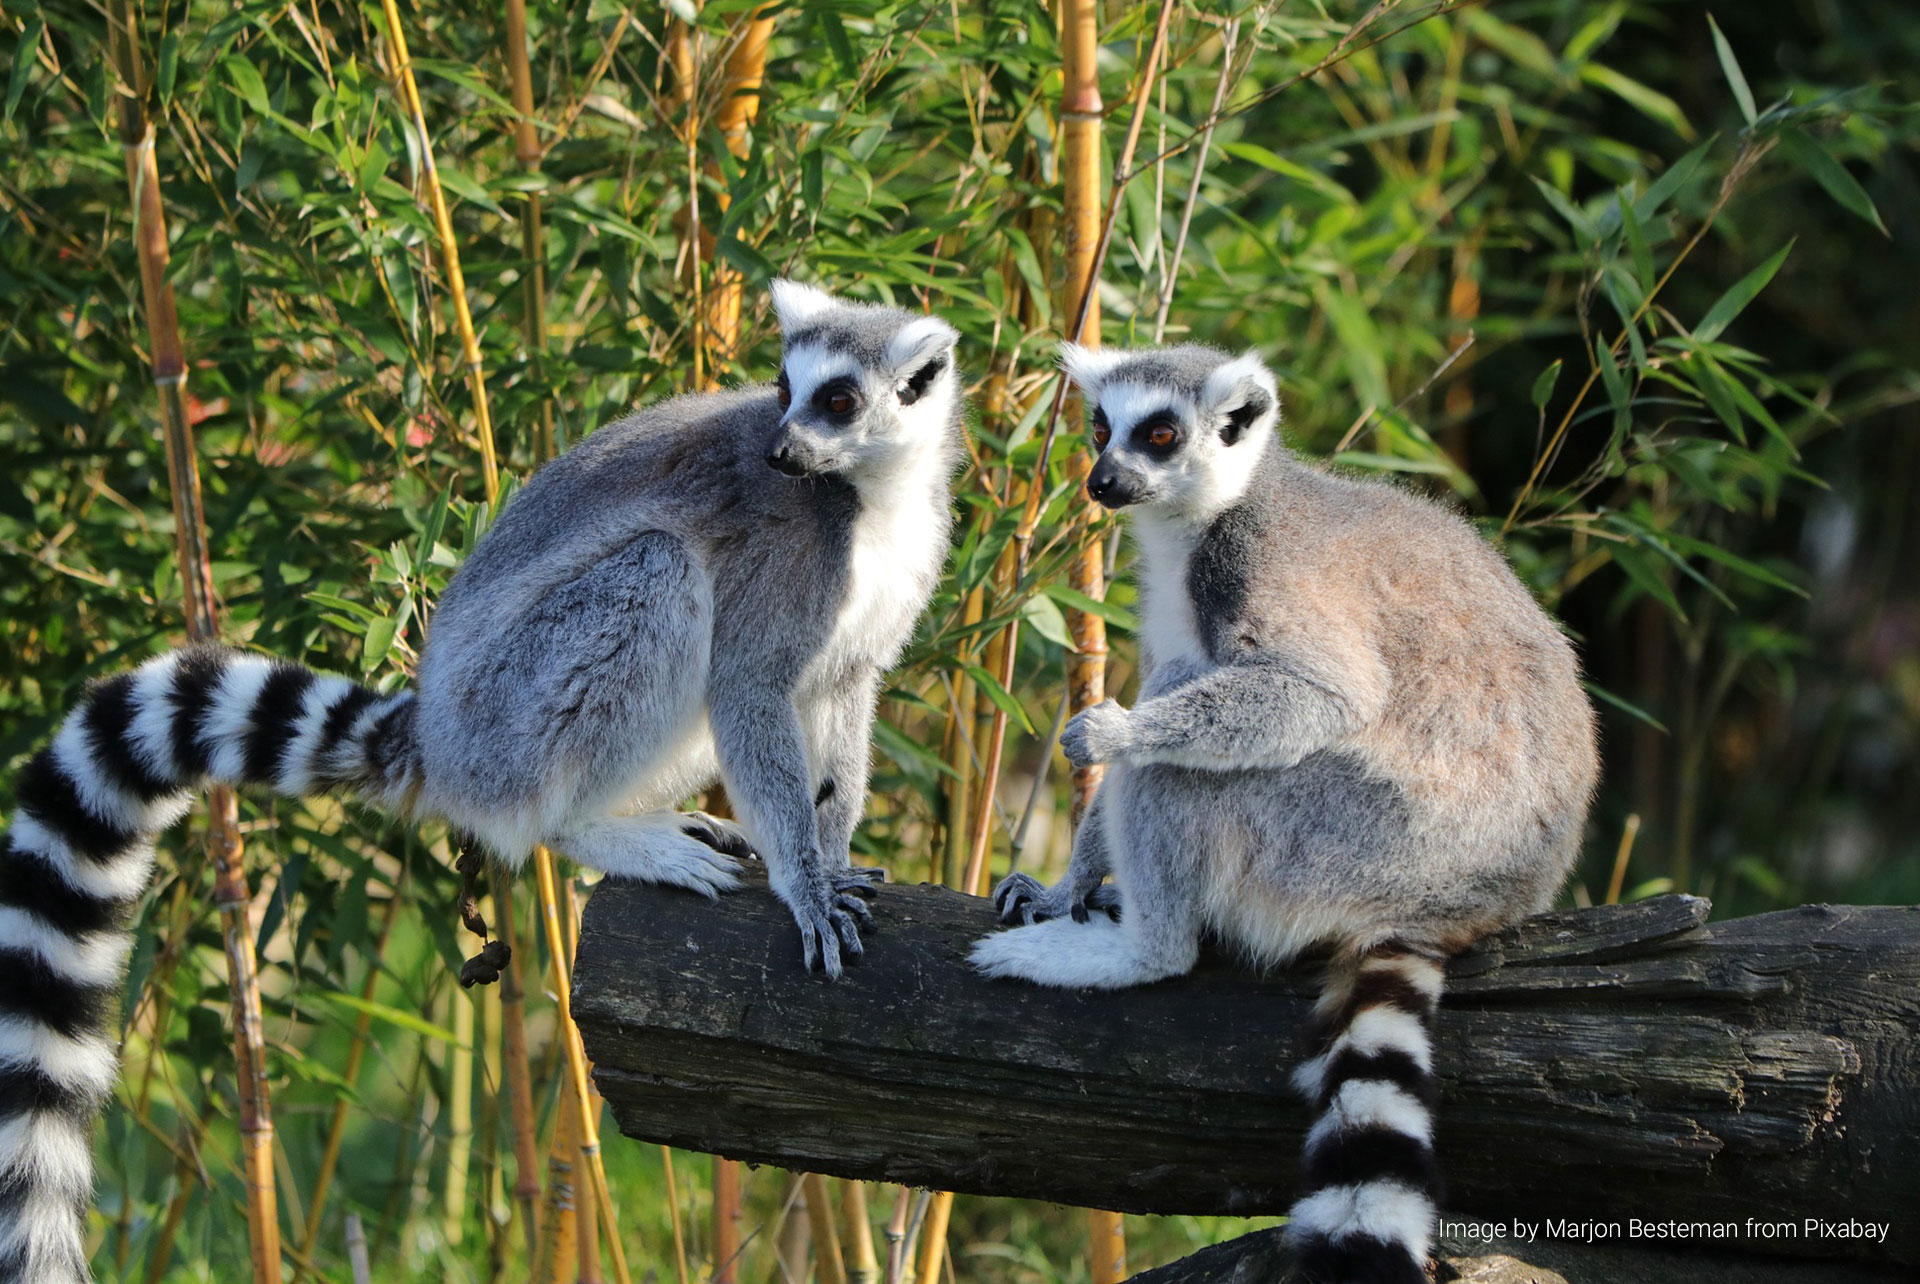 Madagascar Ring tailed lemur Image by Nicky from Pixabay